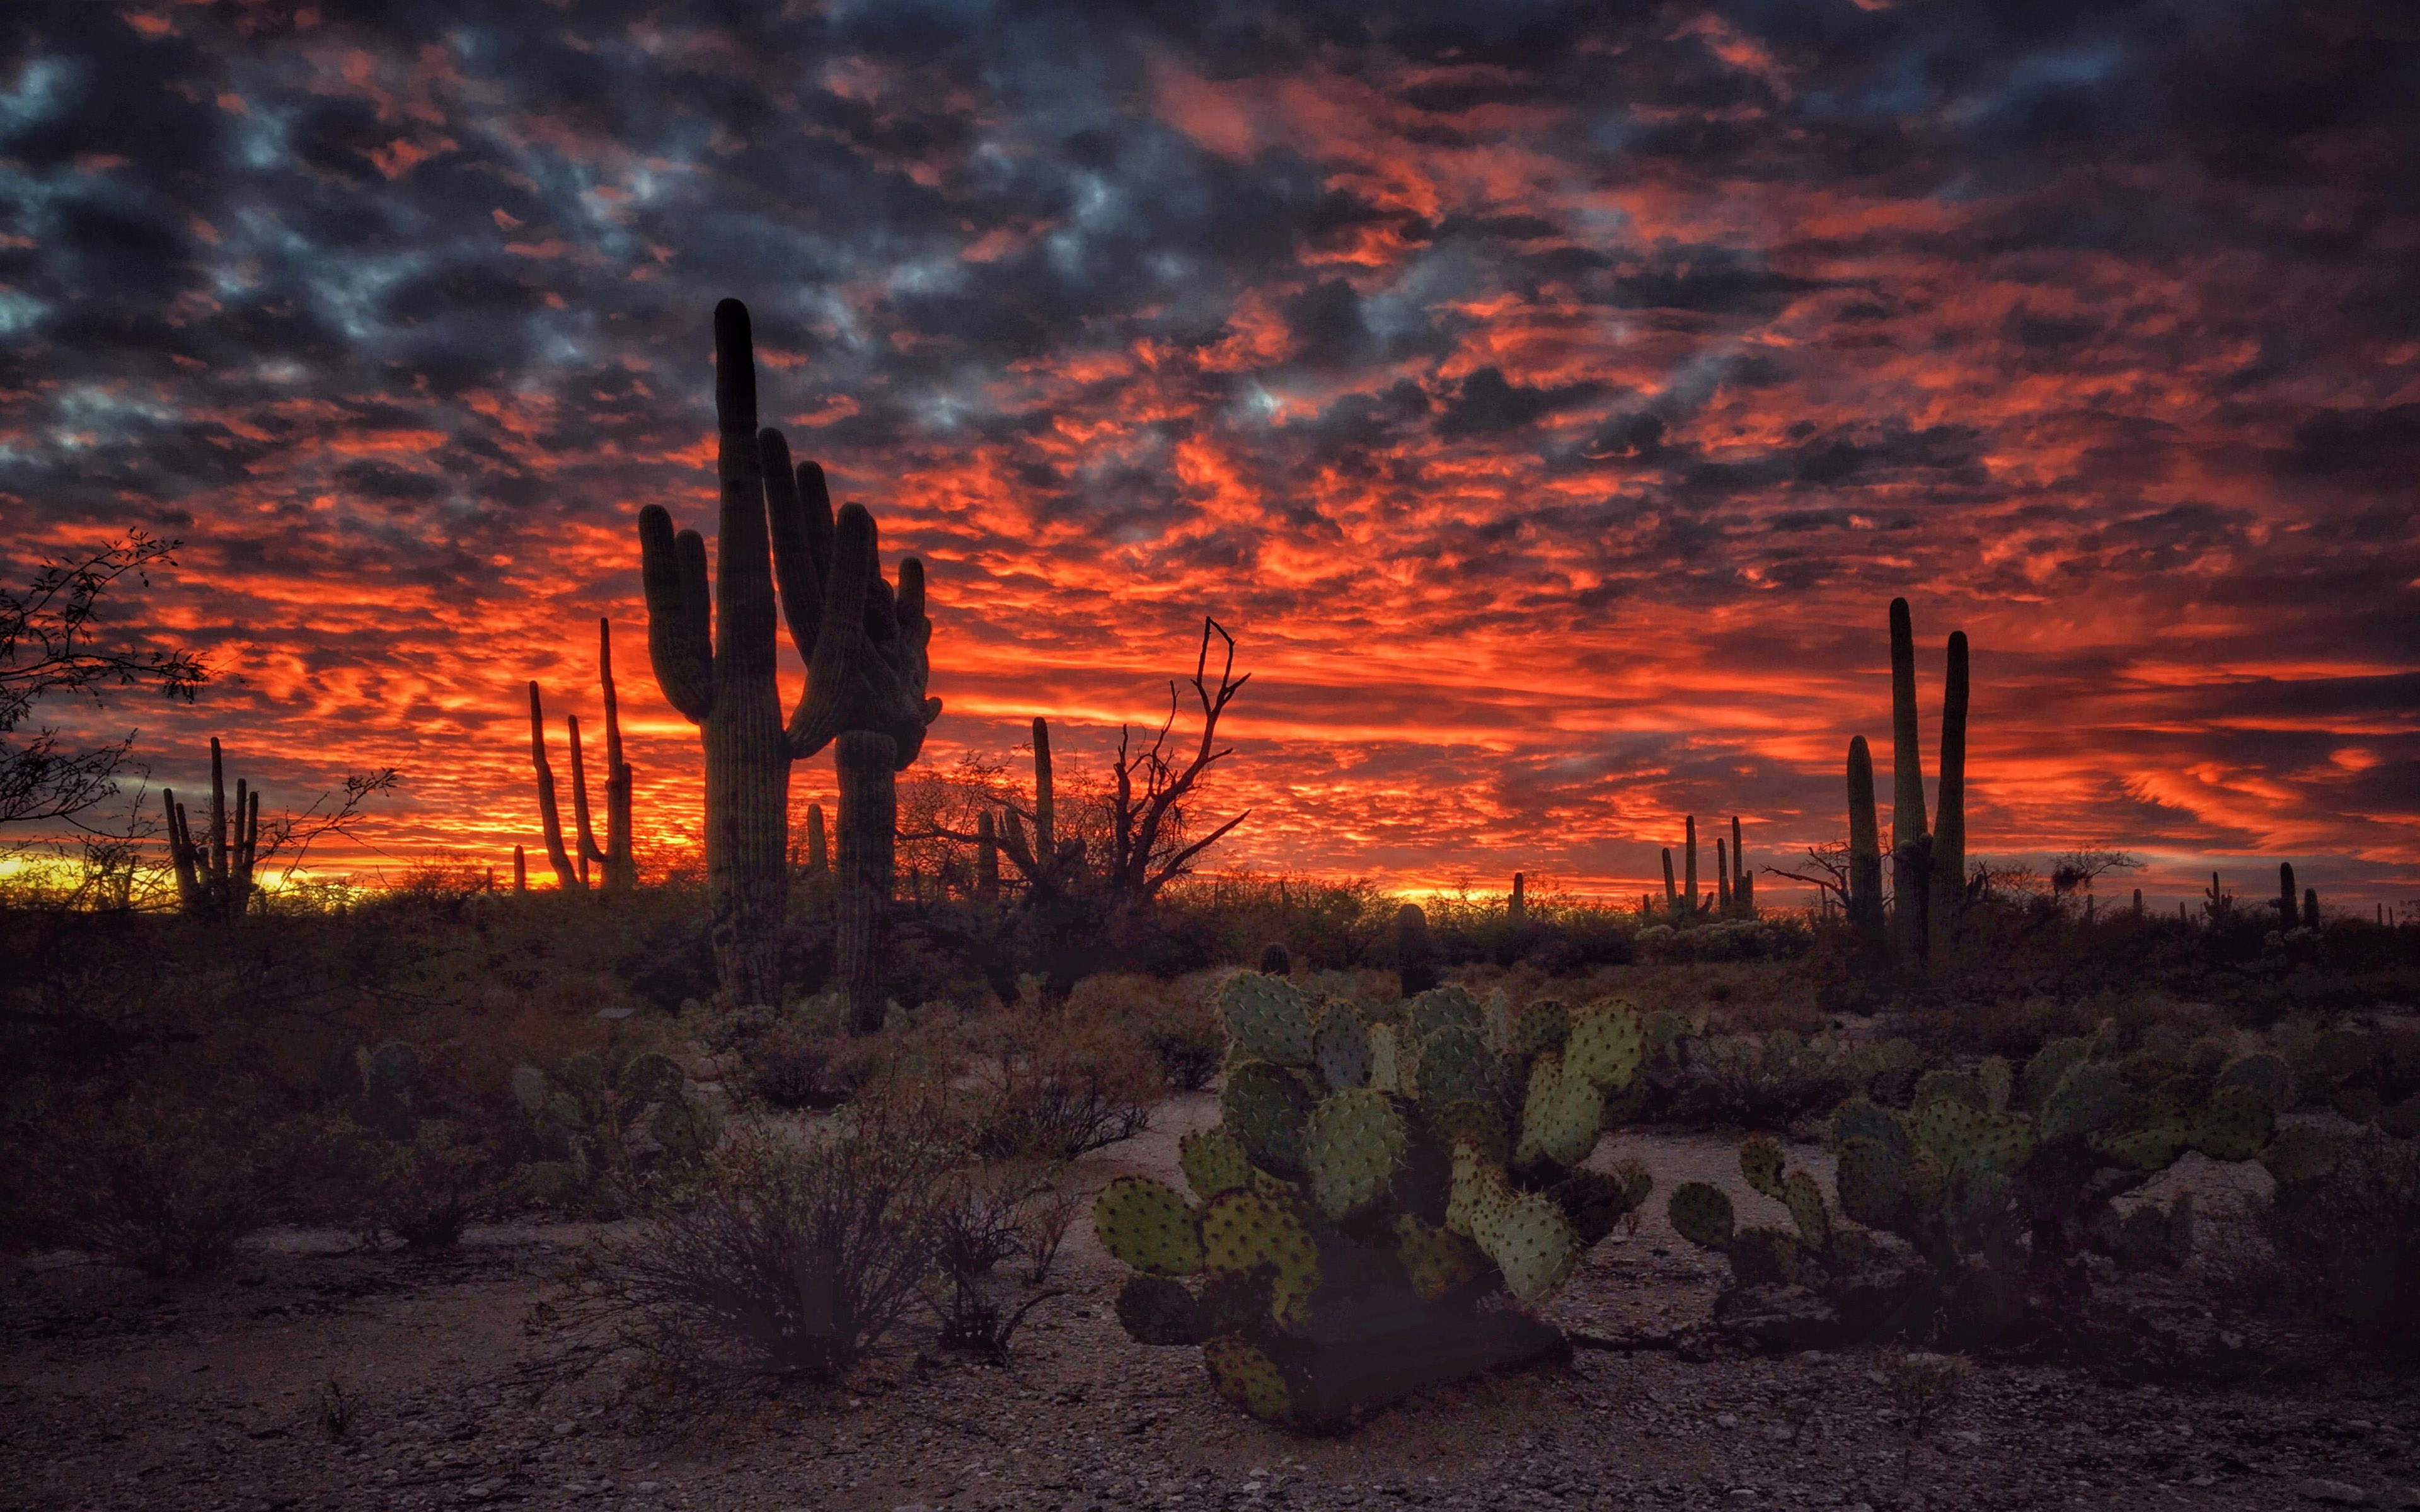 Tucson Arizona sunset flaming sky desert landscape with Cactus Desktop HD Wallpapers for mobile phones and computer 3840x2400